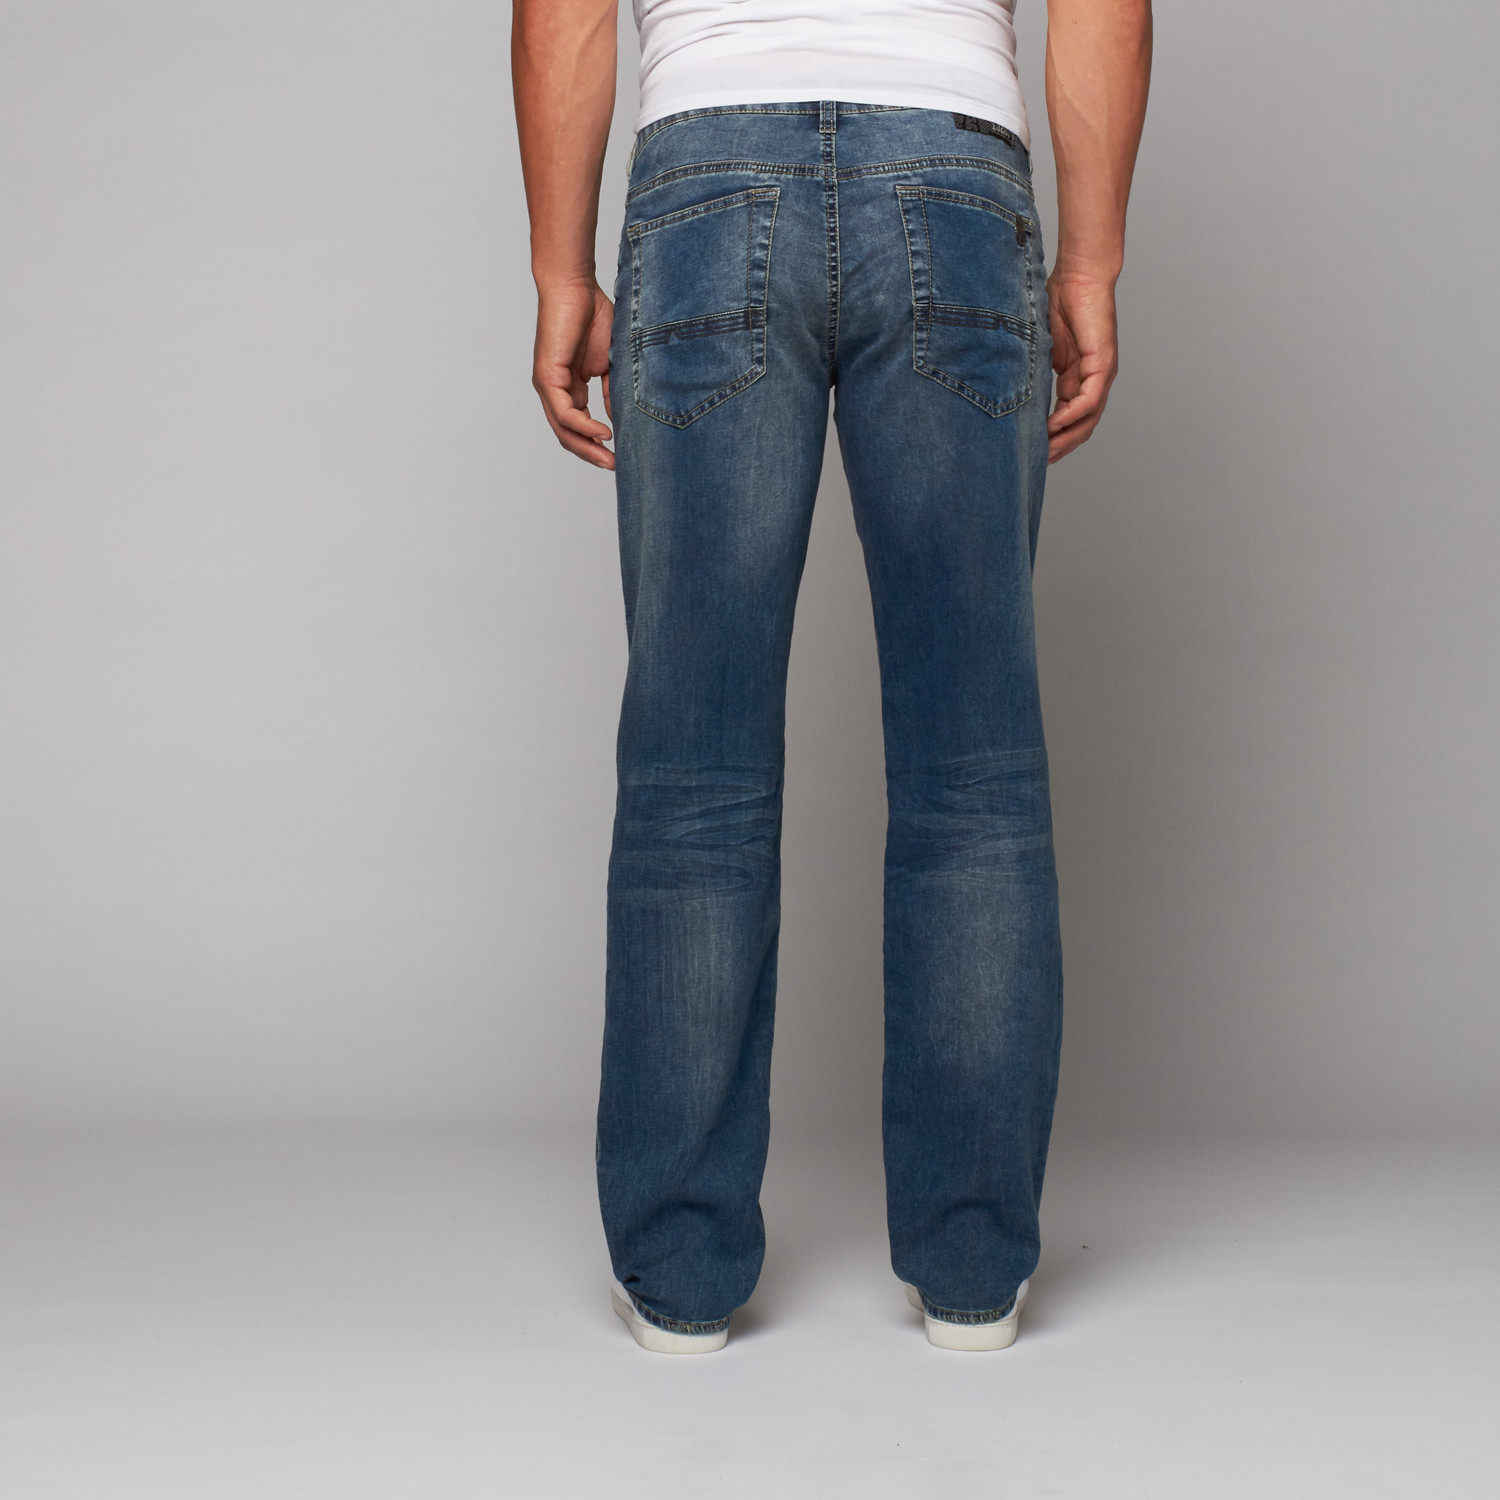 Fred-X Jean // Indigo (31WX30L) - Buffalo Jeans - Touch of Modern